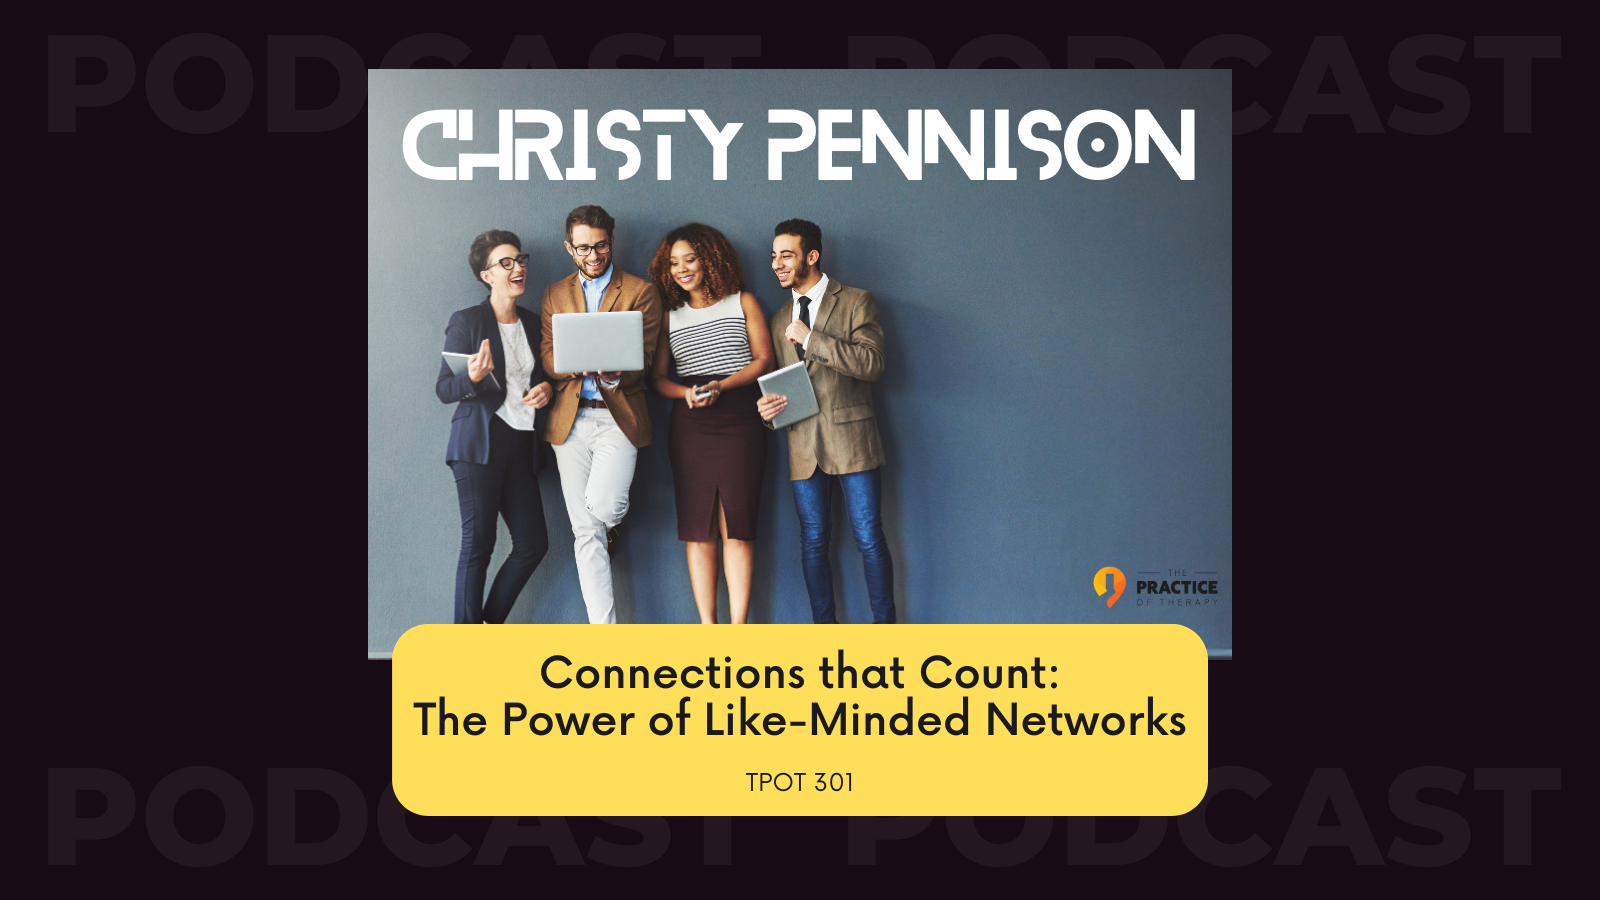 Christy Pennison Connections that Count The Power of Like-Minded Networks TPOT 301